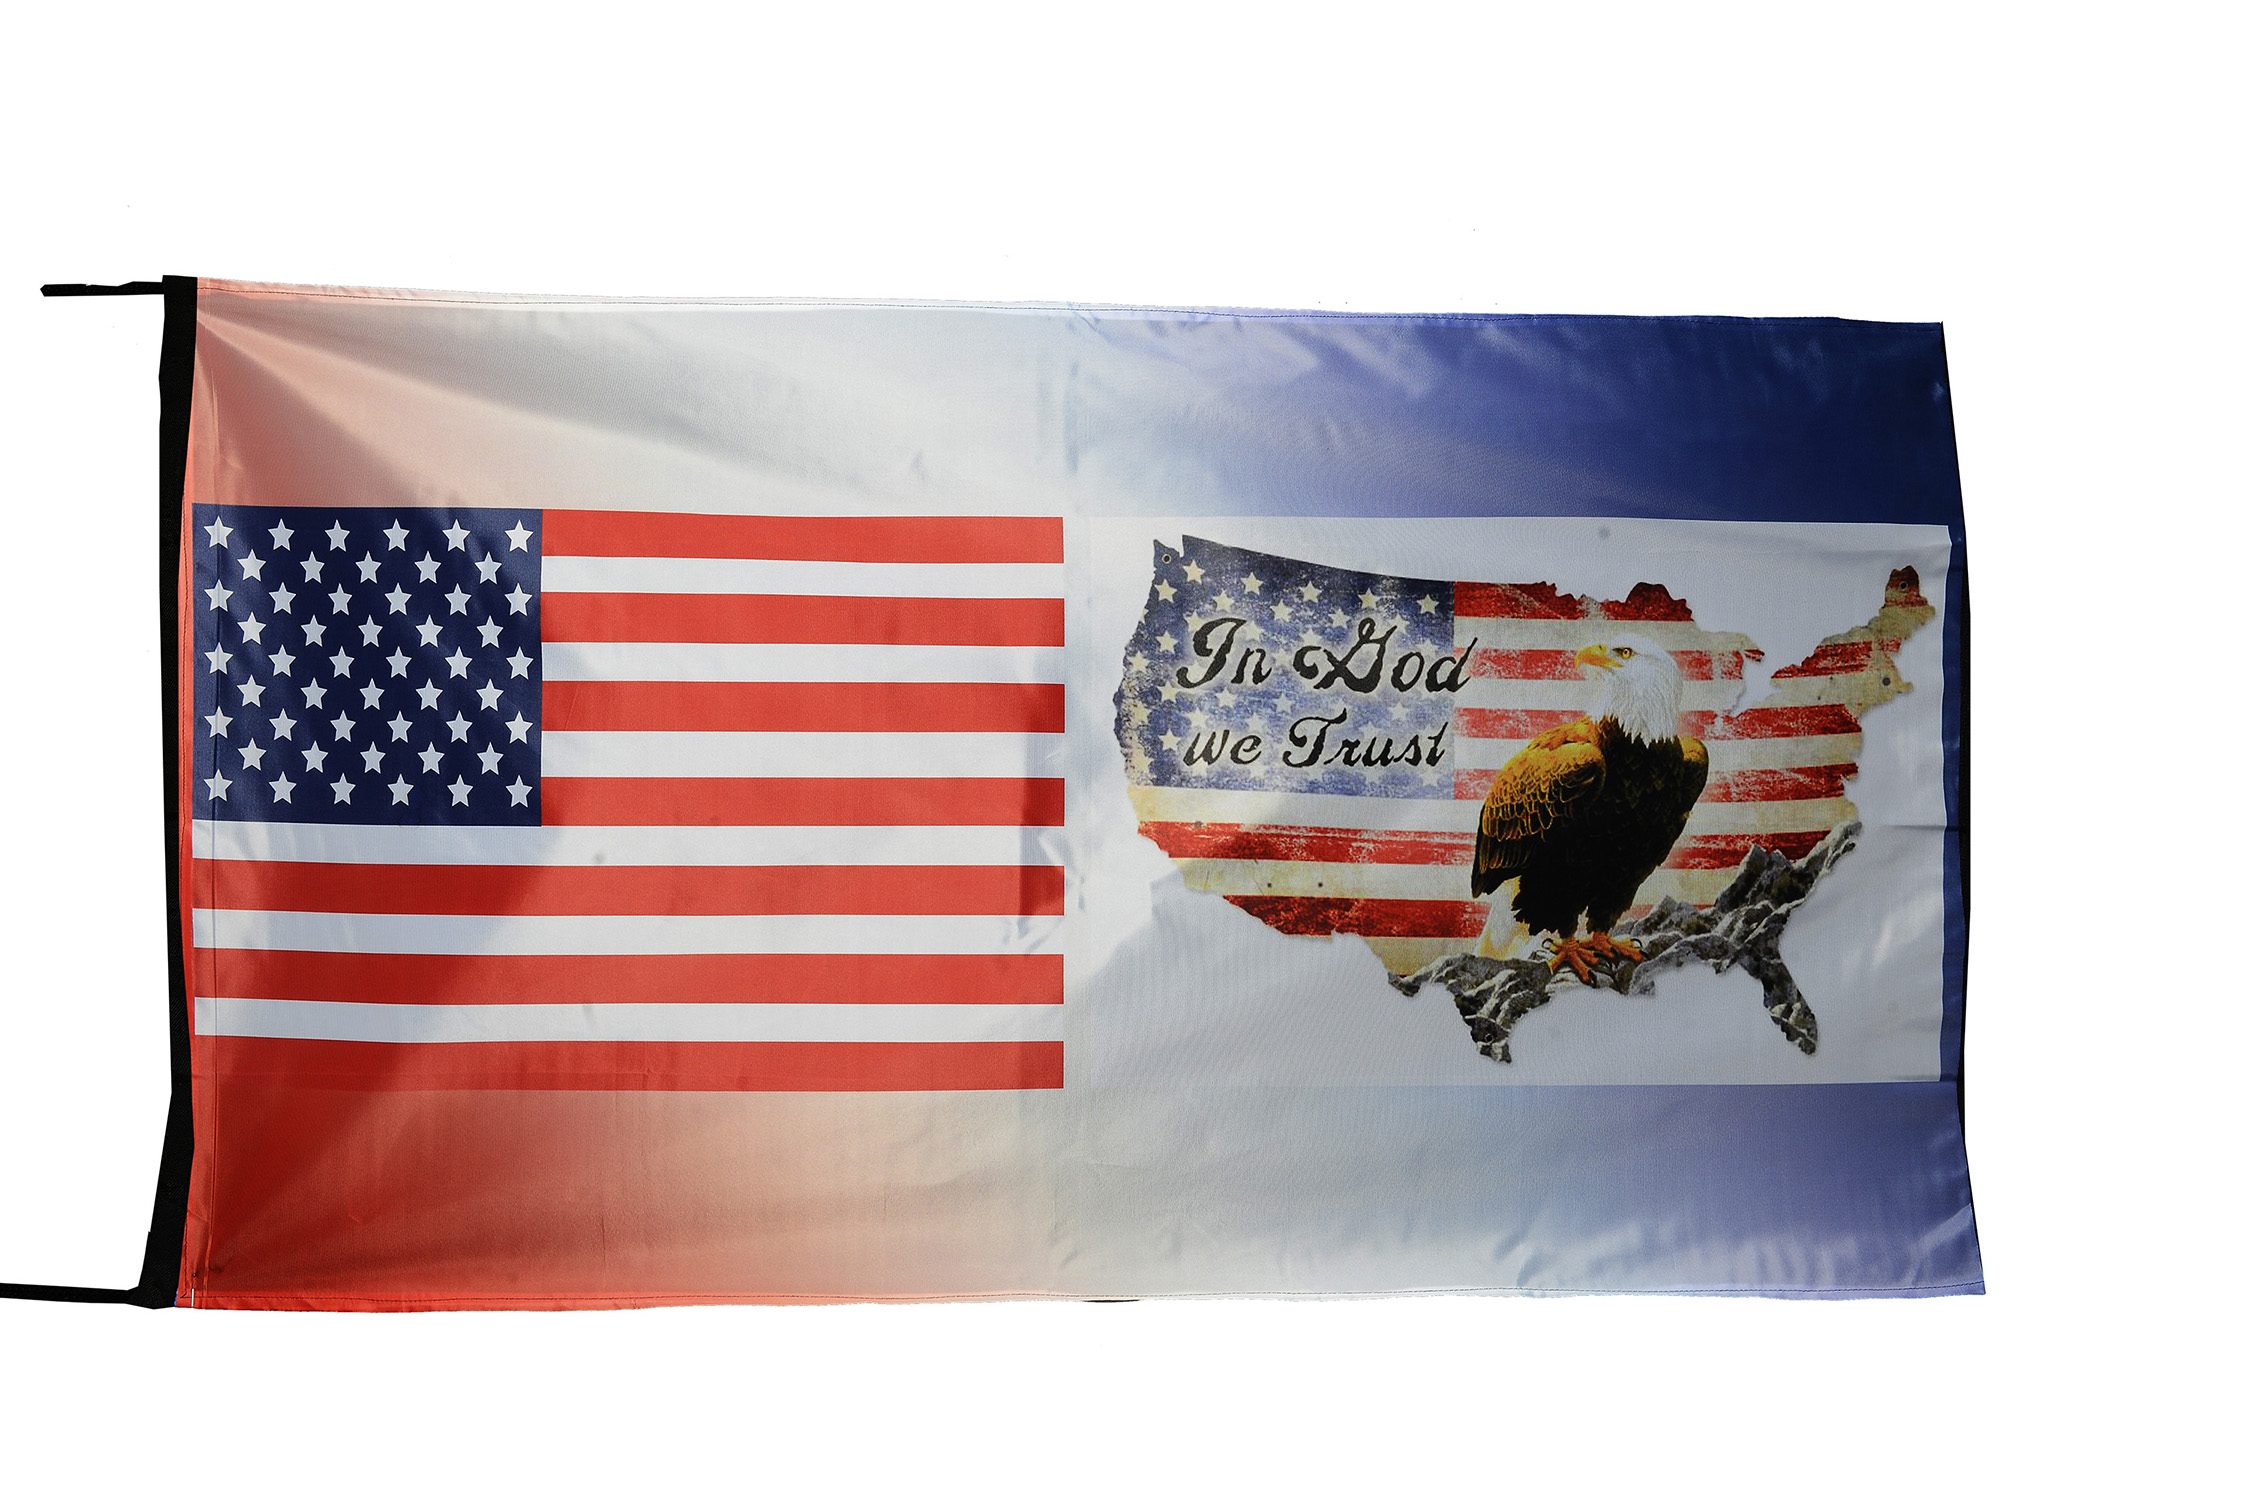 Flag  160 USA / US Country / United States Of America and In God We Trust United We Stand / Patriotic / Pride Hybrid Weather-Resistant Polyester Outdoor Flag Landscape Banner / Vivid Colors / 3 X 5 FT (150 x 90cm) International Flags for Sale